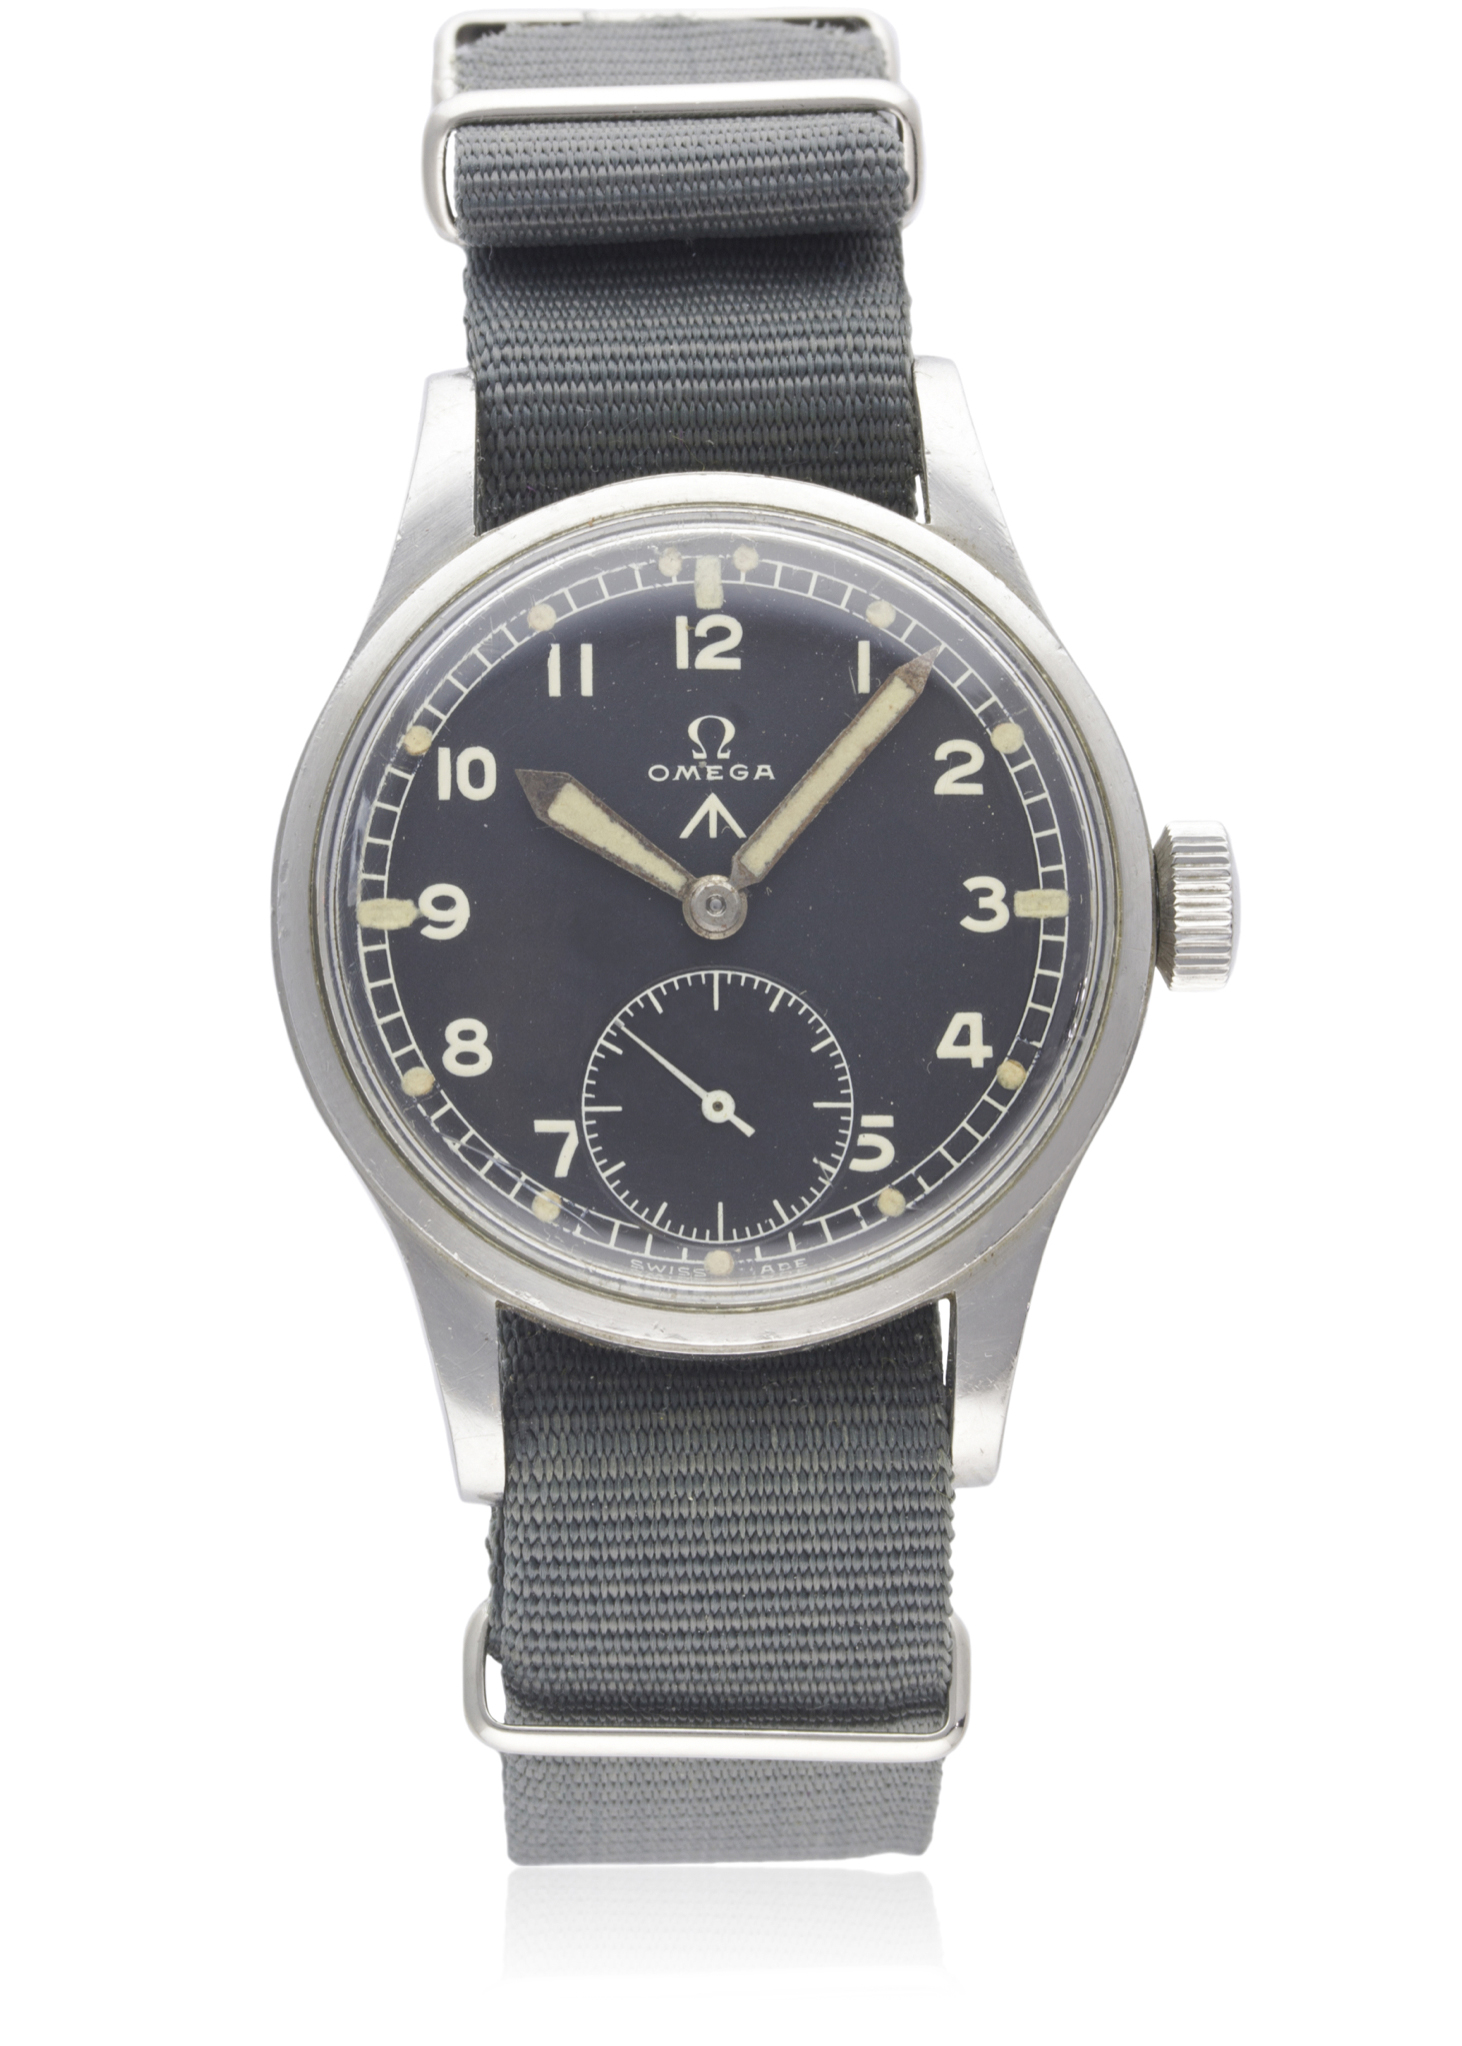 A GENTLEMAN'S STAINLESS STEEL BRITISH MILITARY OMEGA W.W.W. WRIST WATCH CIRCA 1947, PART OF THE "